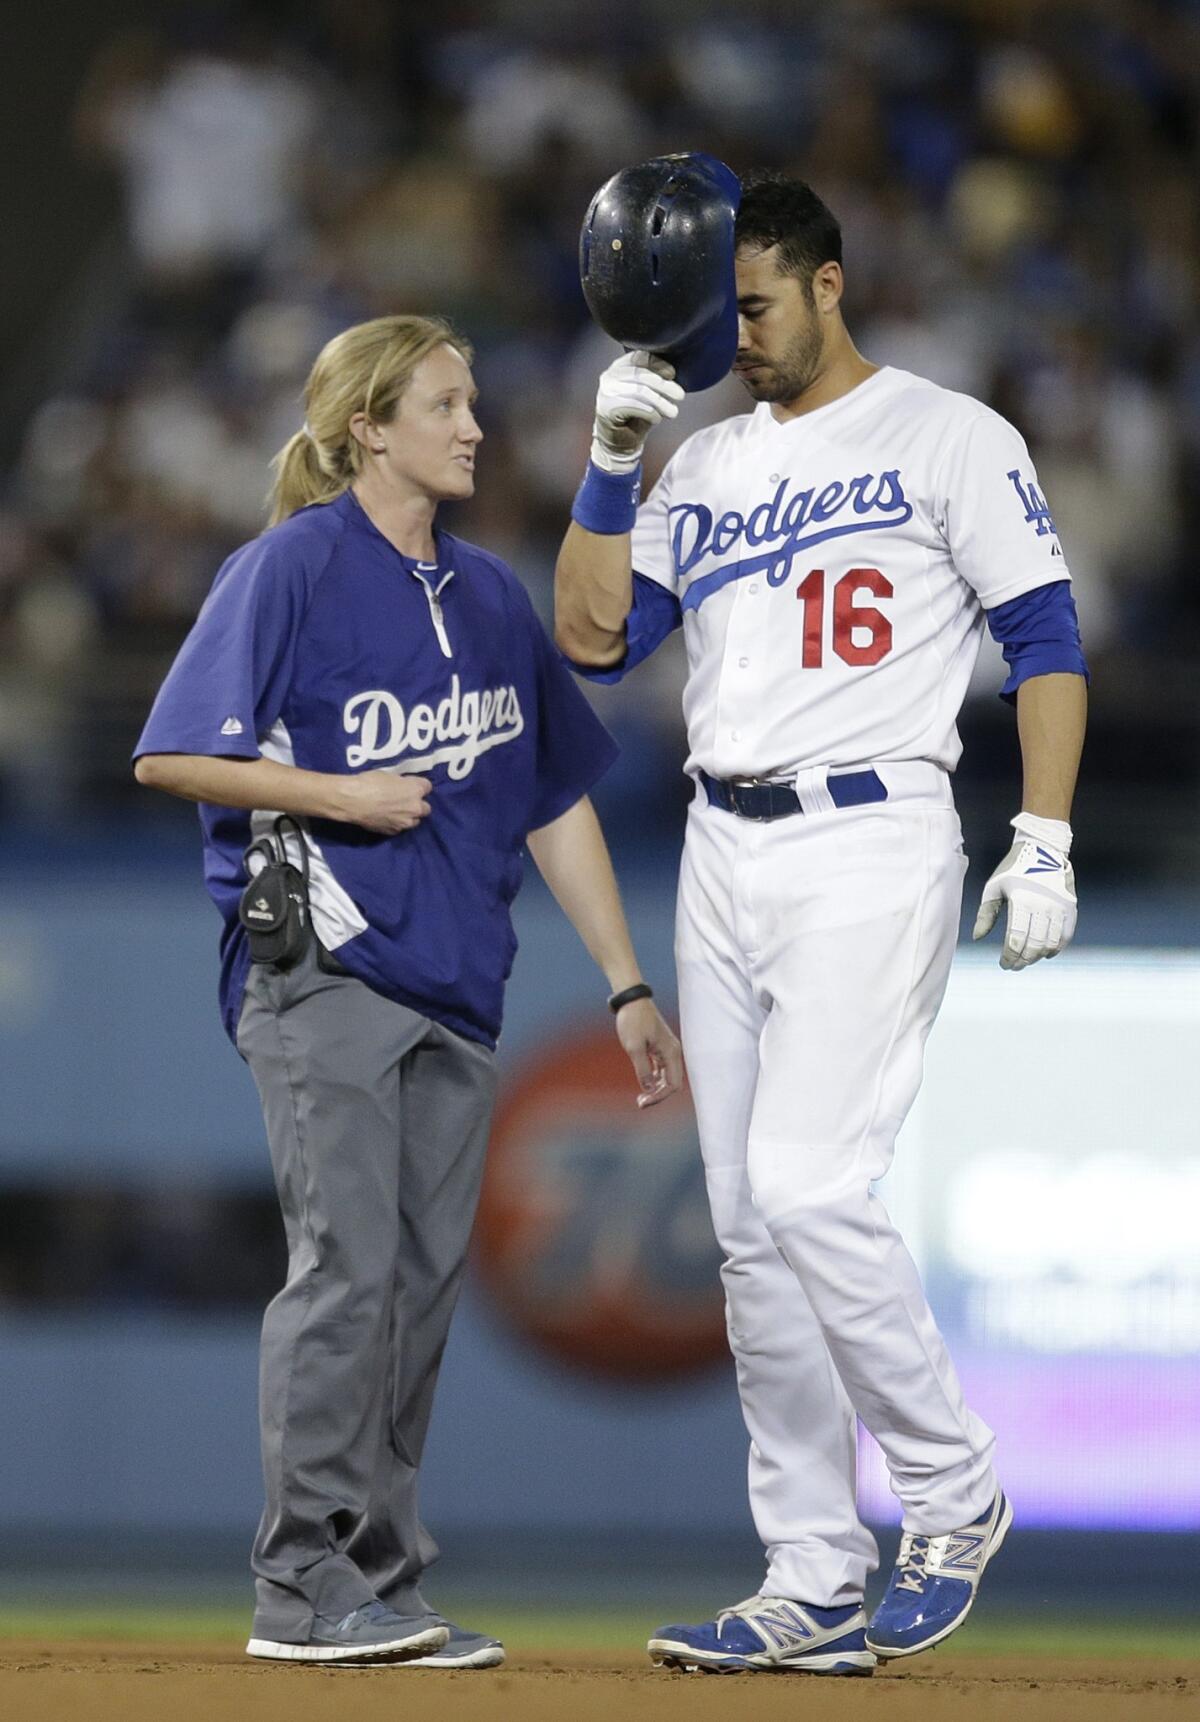 Dodgers center fielder Andre Ethier speaks with assistant athletic trainer Nancy Patterson after suffering a left ankle injury during the eighth inning of the Dodgers' 4-2 loss to the San Francisco Giants.